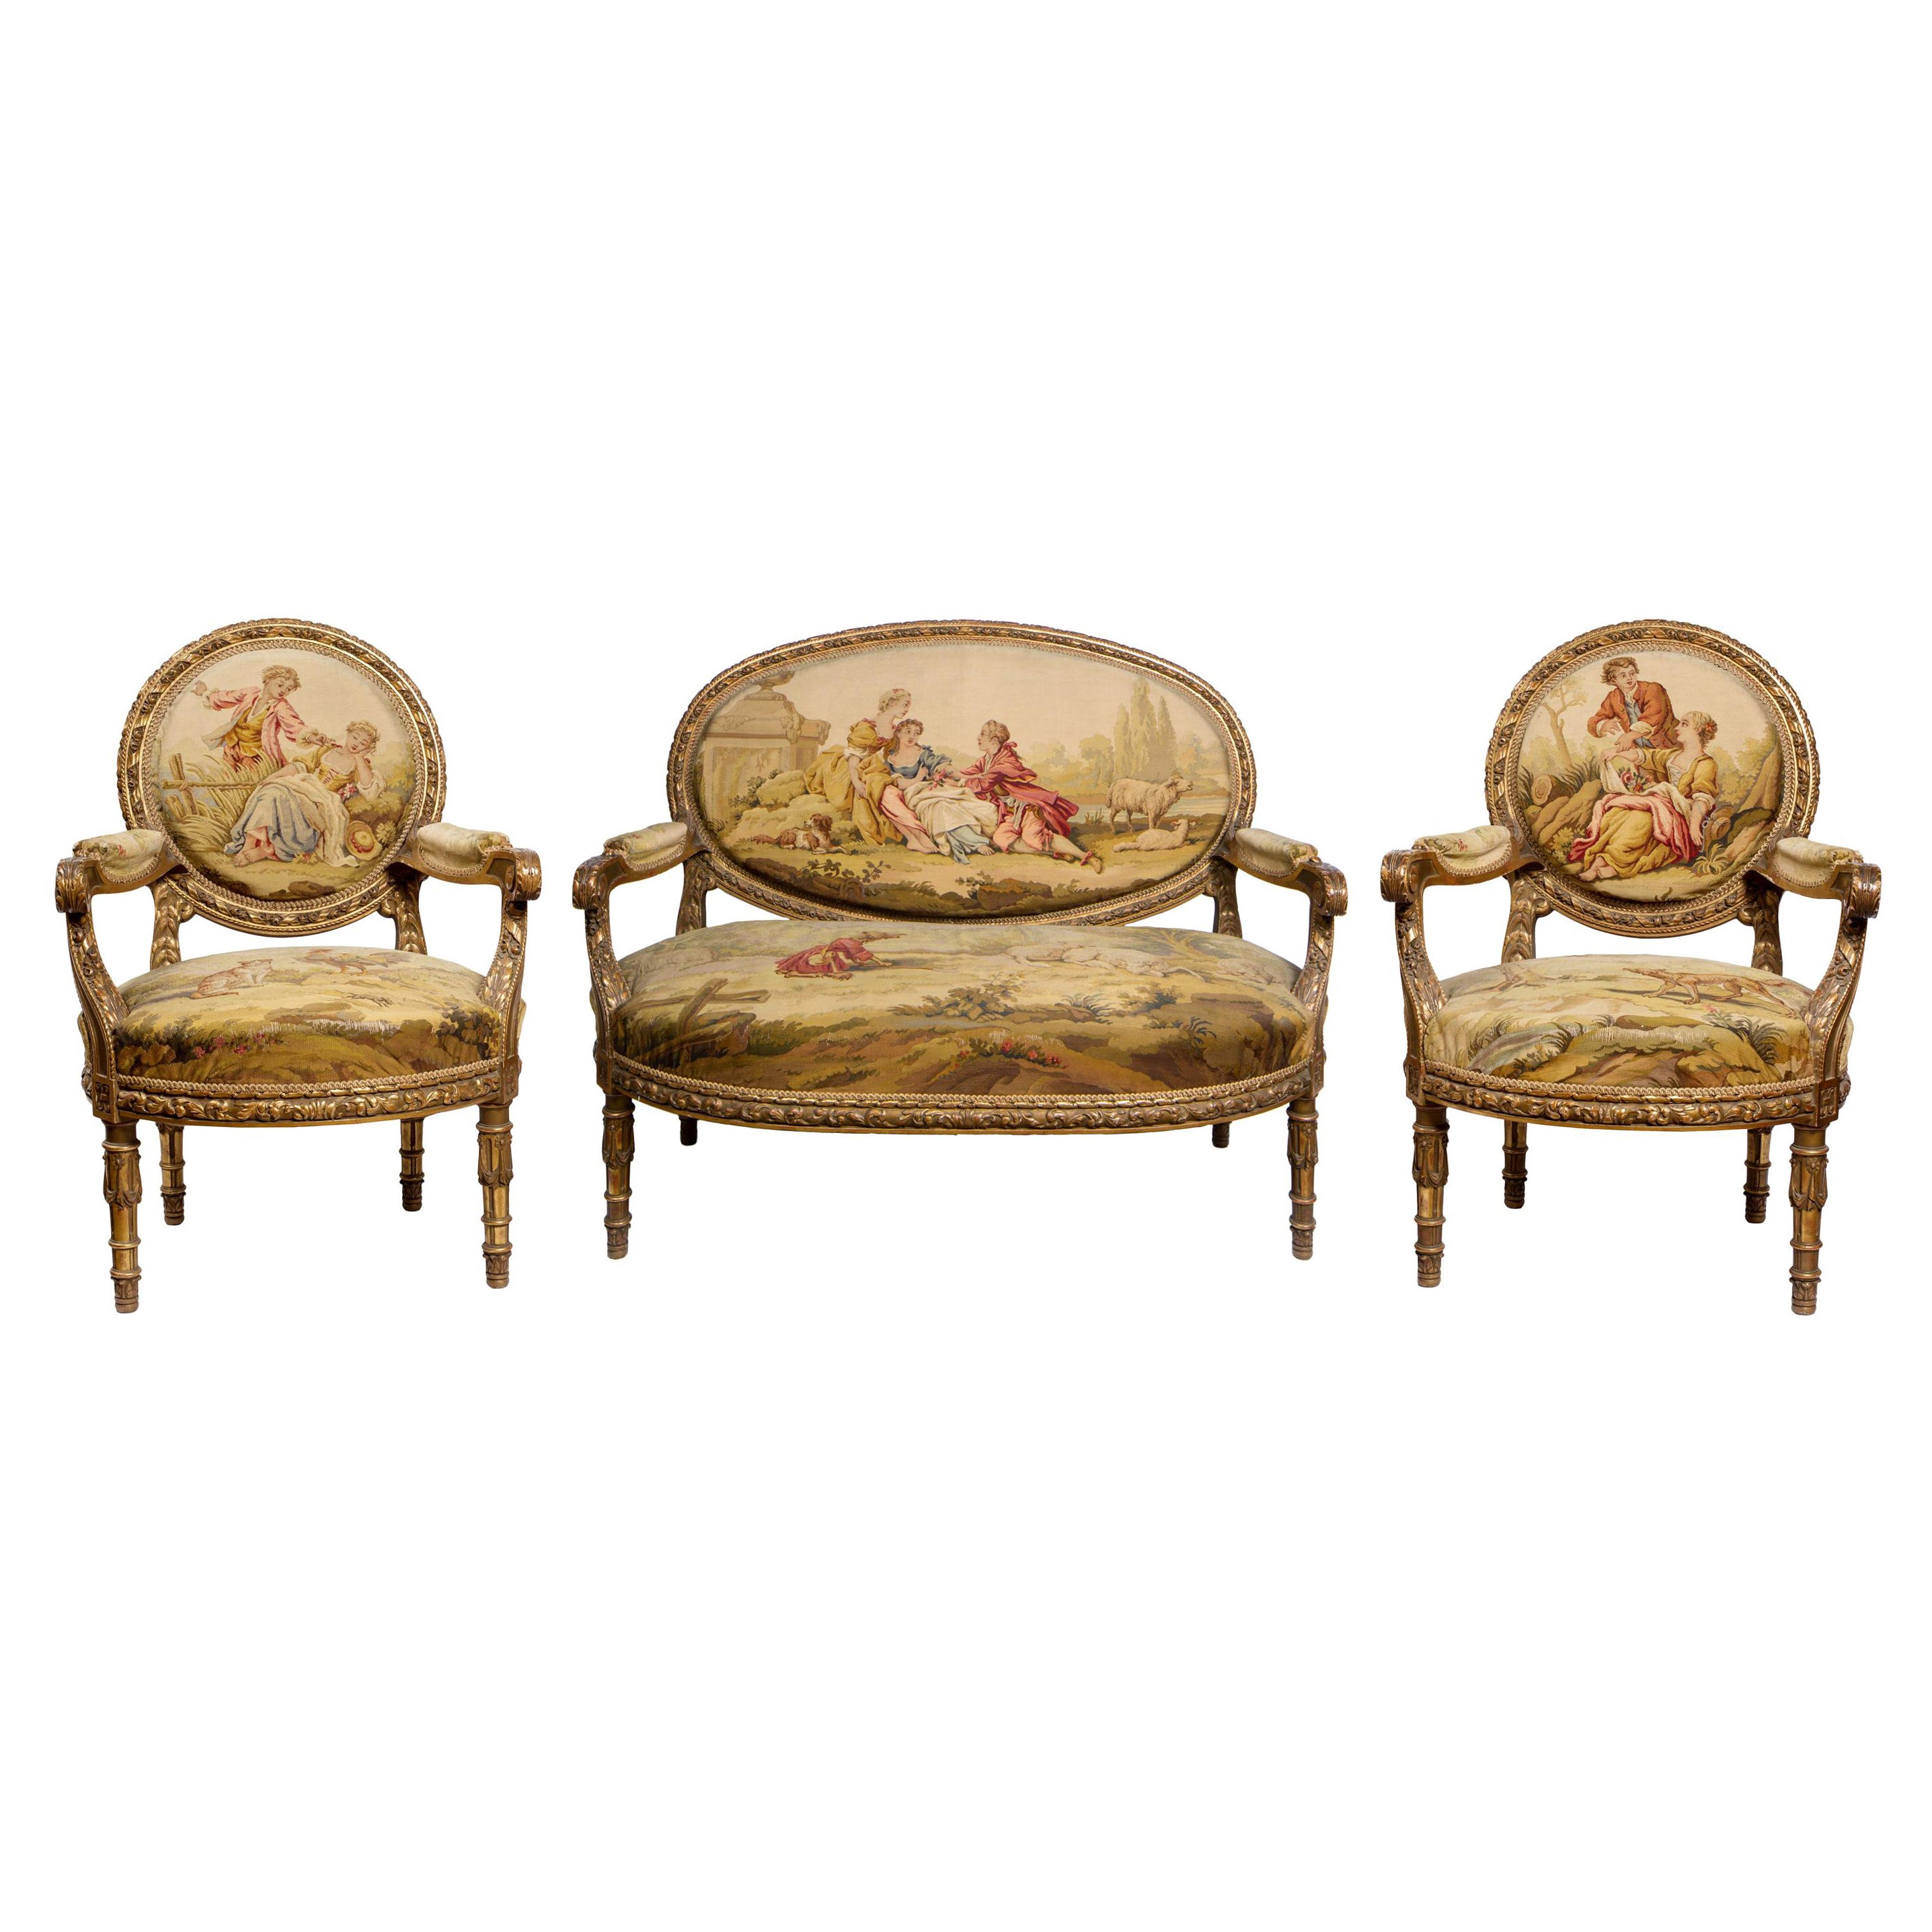 19th C. French 3 Piece Giltwood Salon Suite, Settee, Pair Armchairs, Tapestry